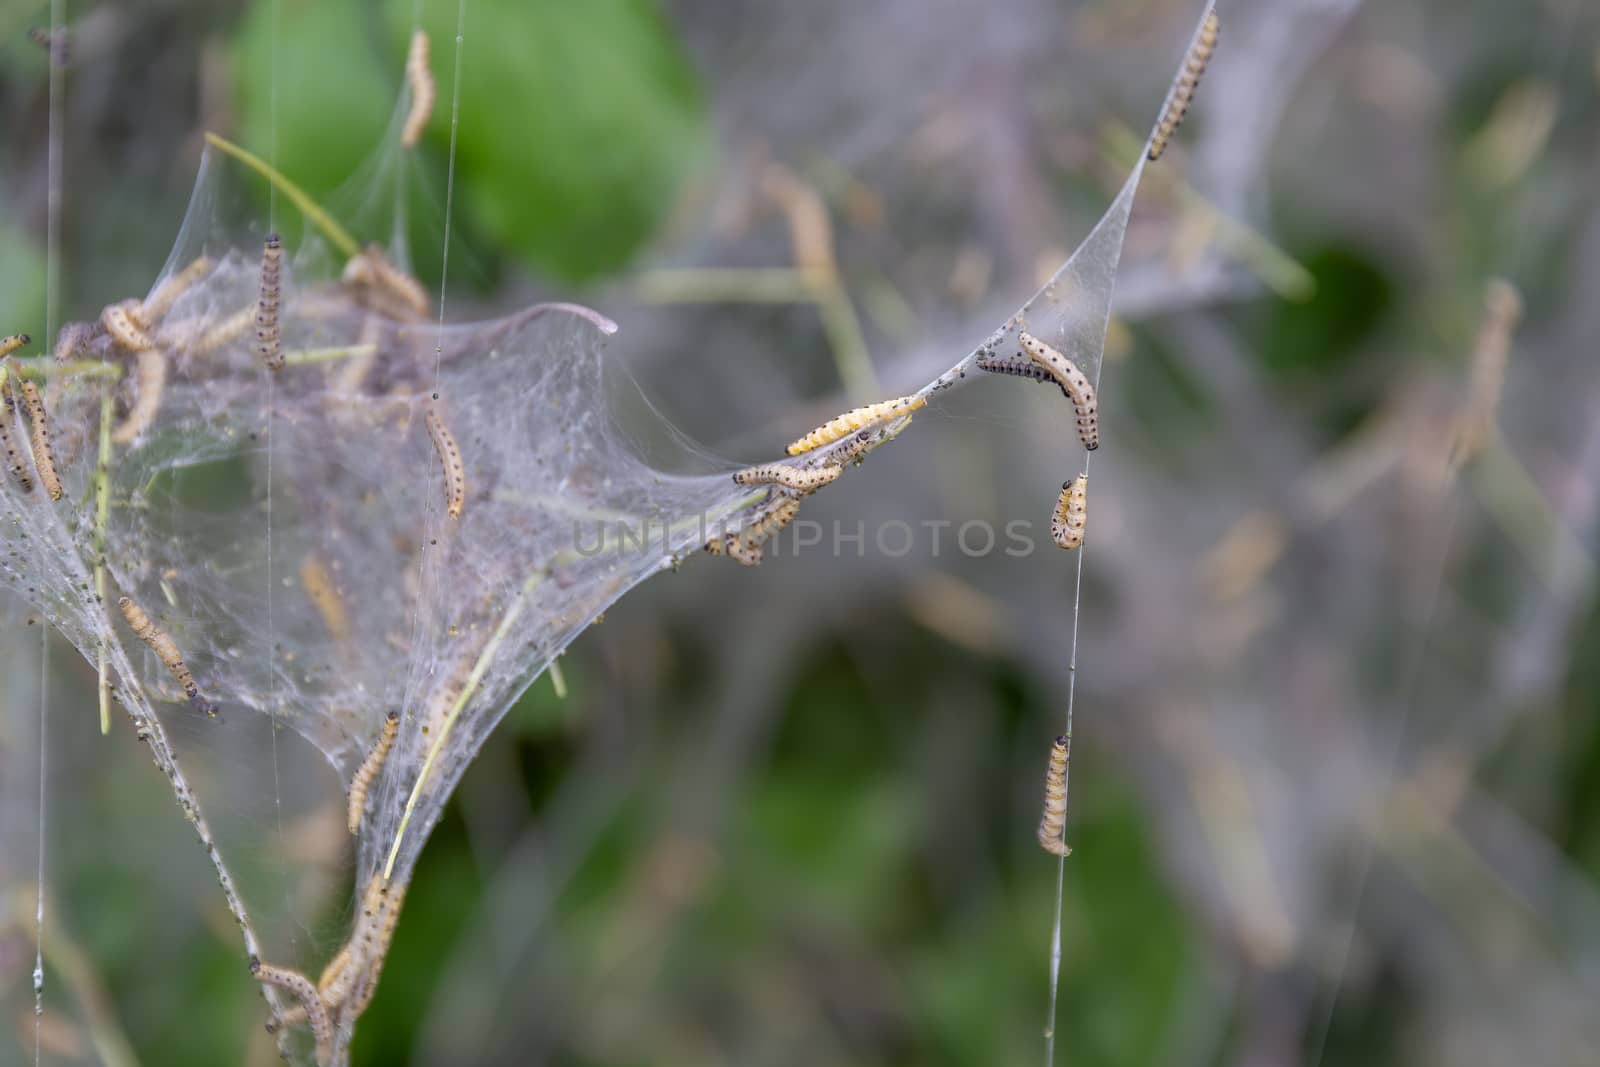 Nesting web of ermine moth caterpillars, yponomeutidae, hanging from the branches of a tree